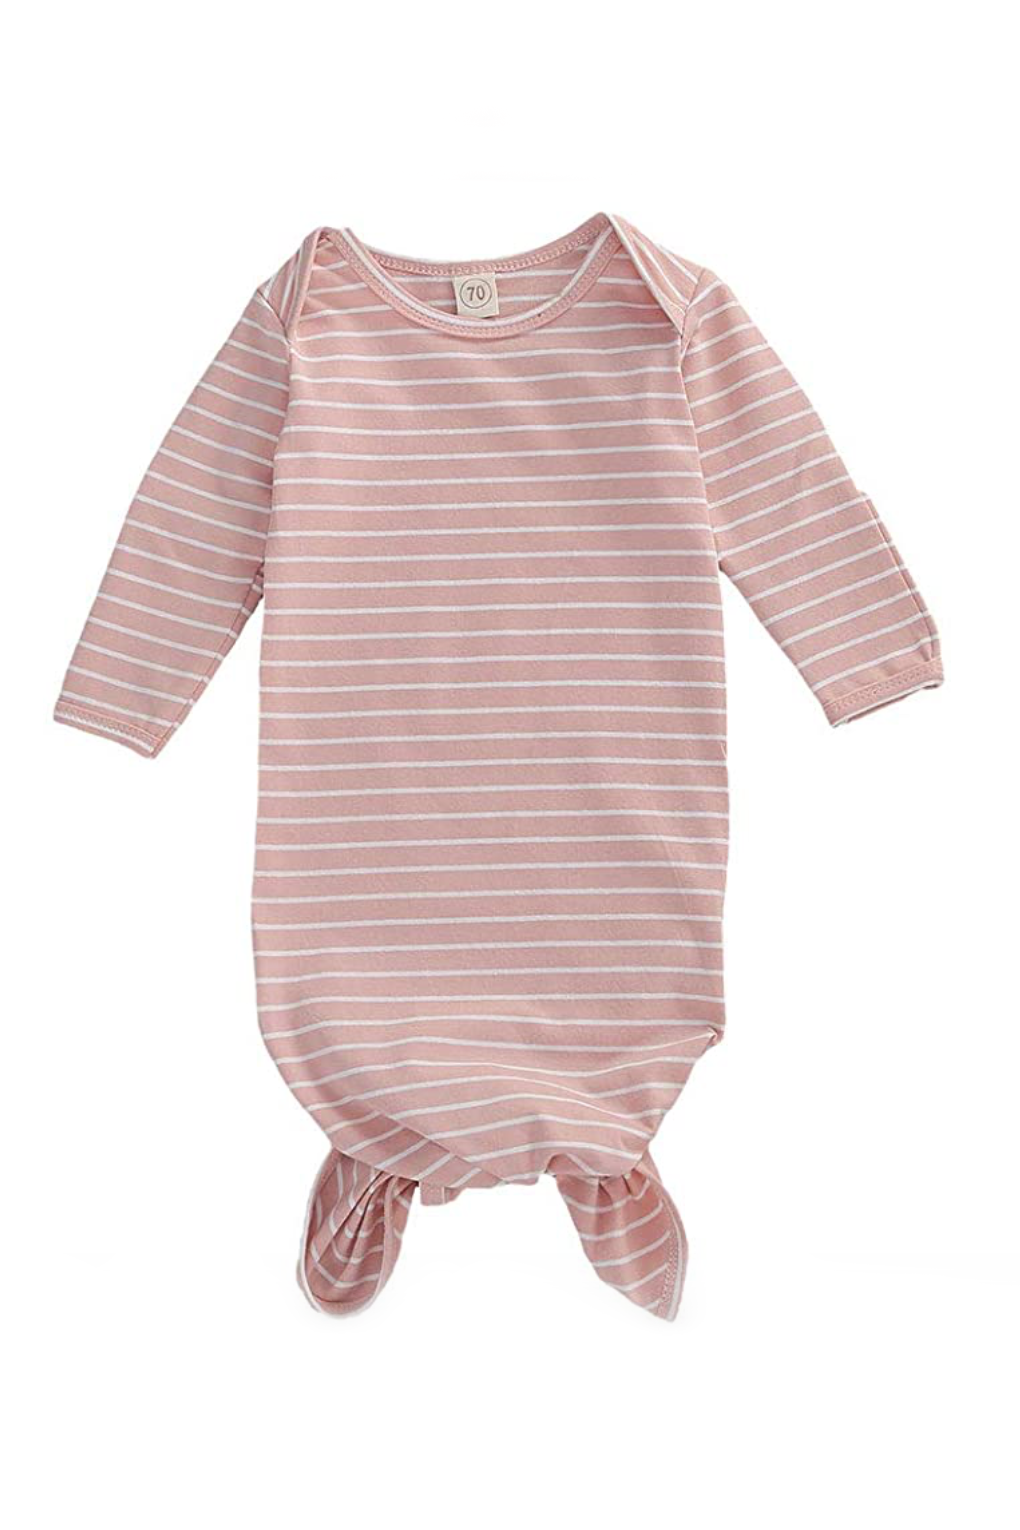 babeleven pink stripe baby gown newborn photographer.png